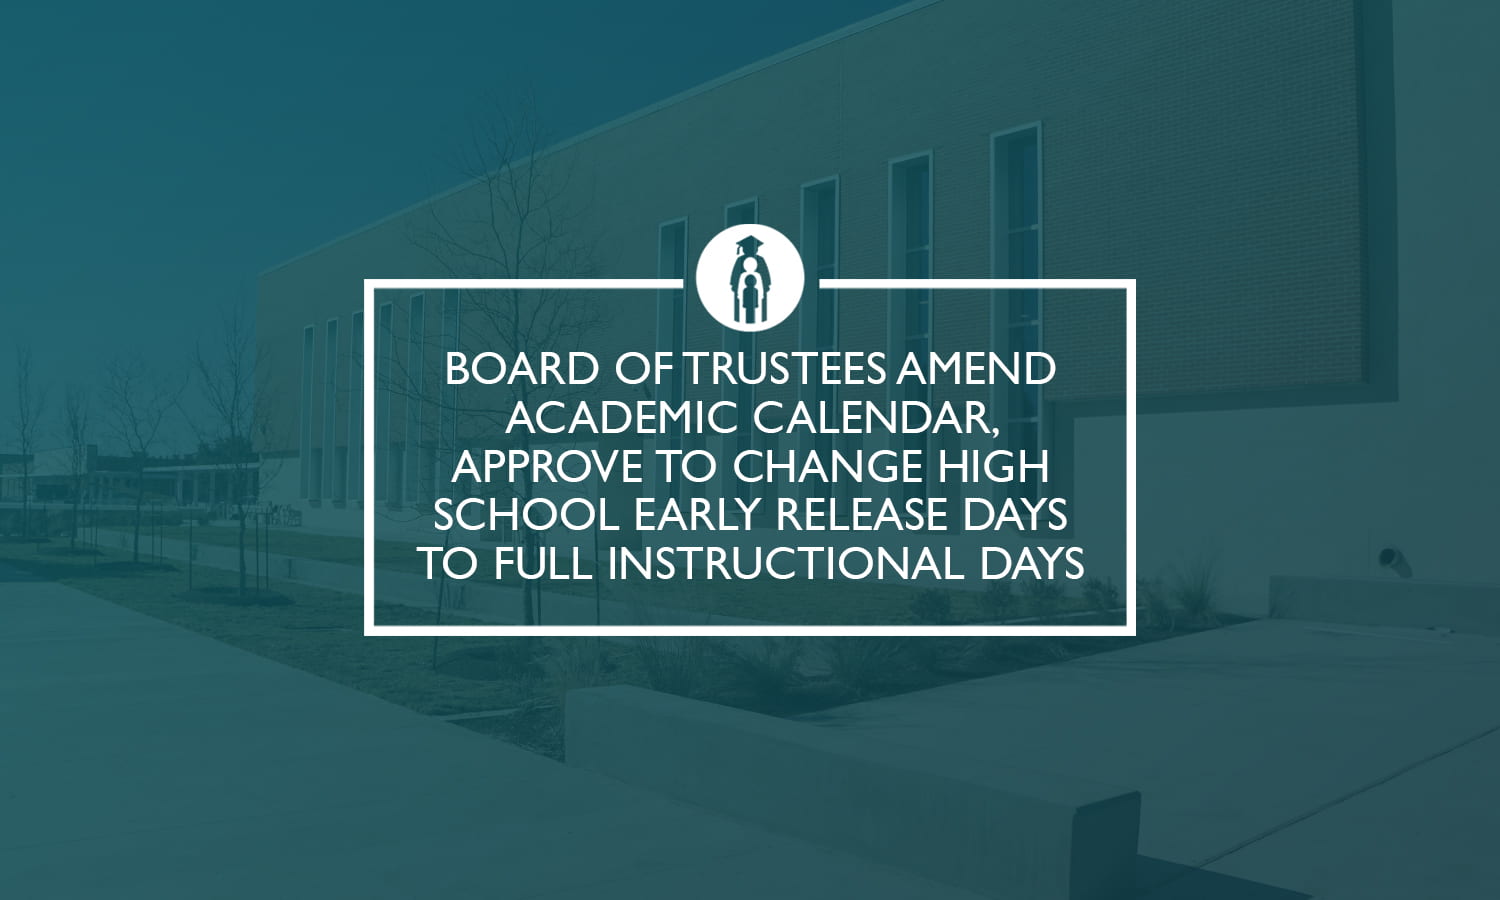 Board of Trustees amend academic calendar approve to change high